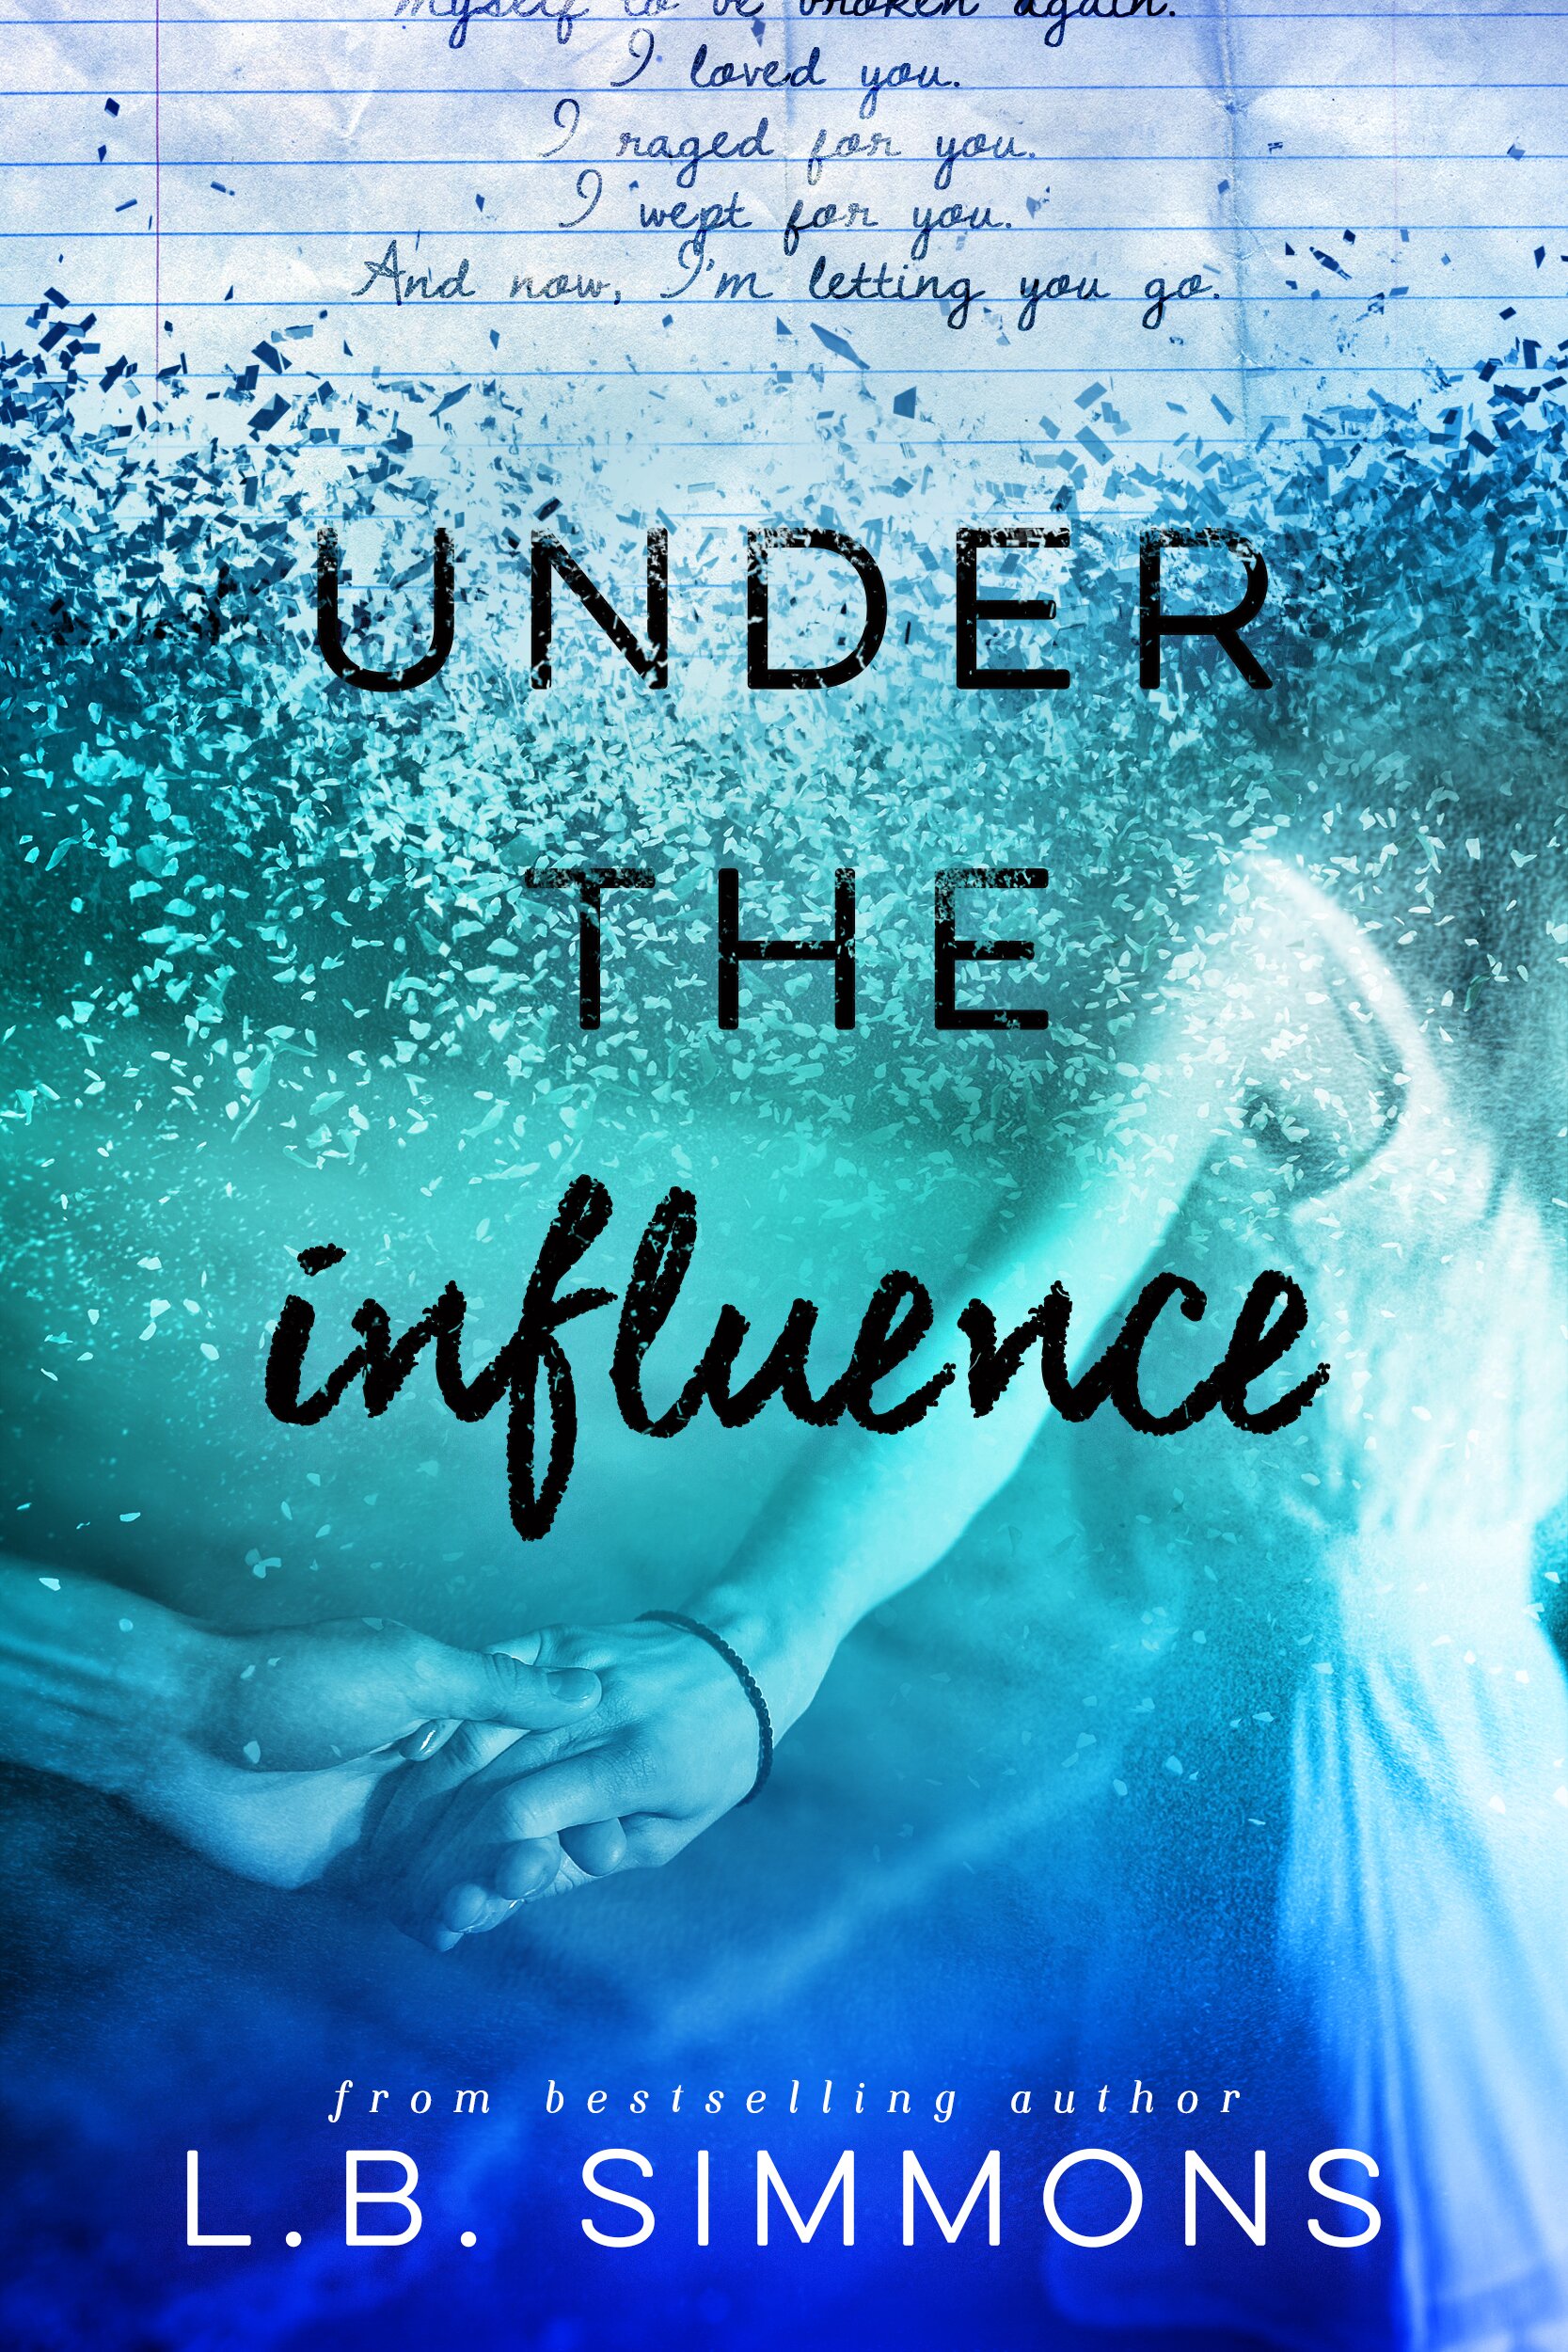 {Blog Tour Review} Under the Influence by L.B. Simmons